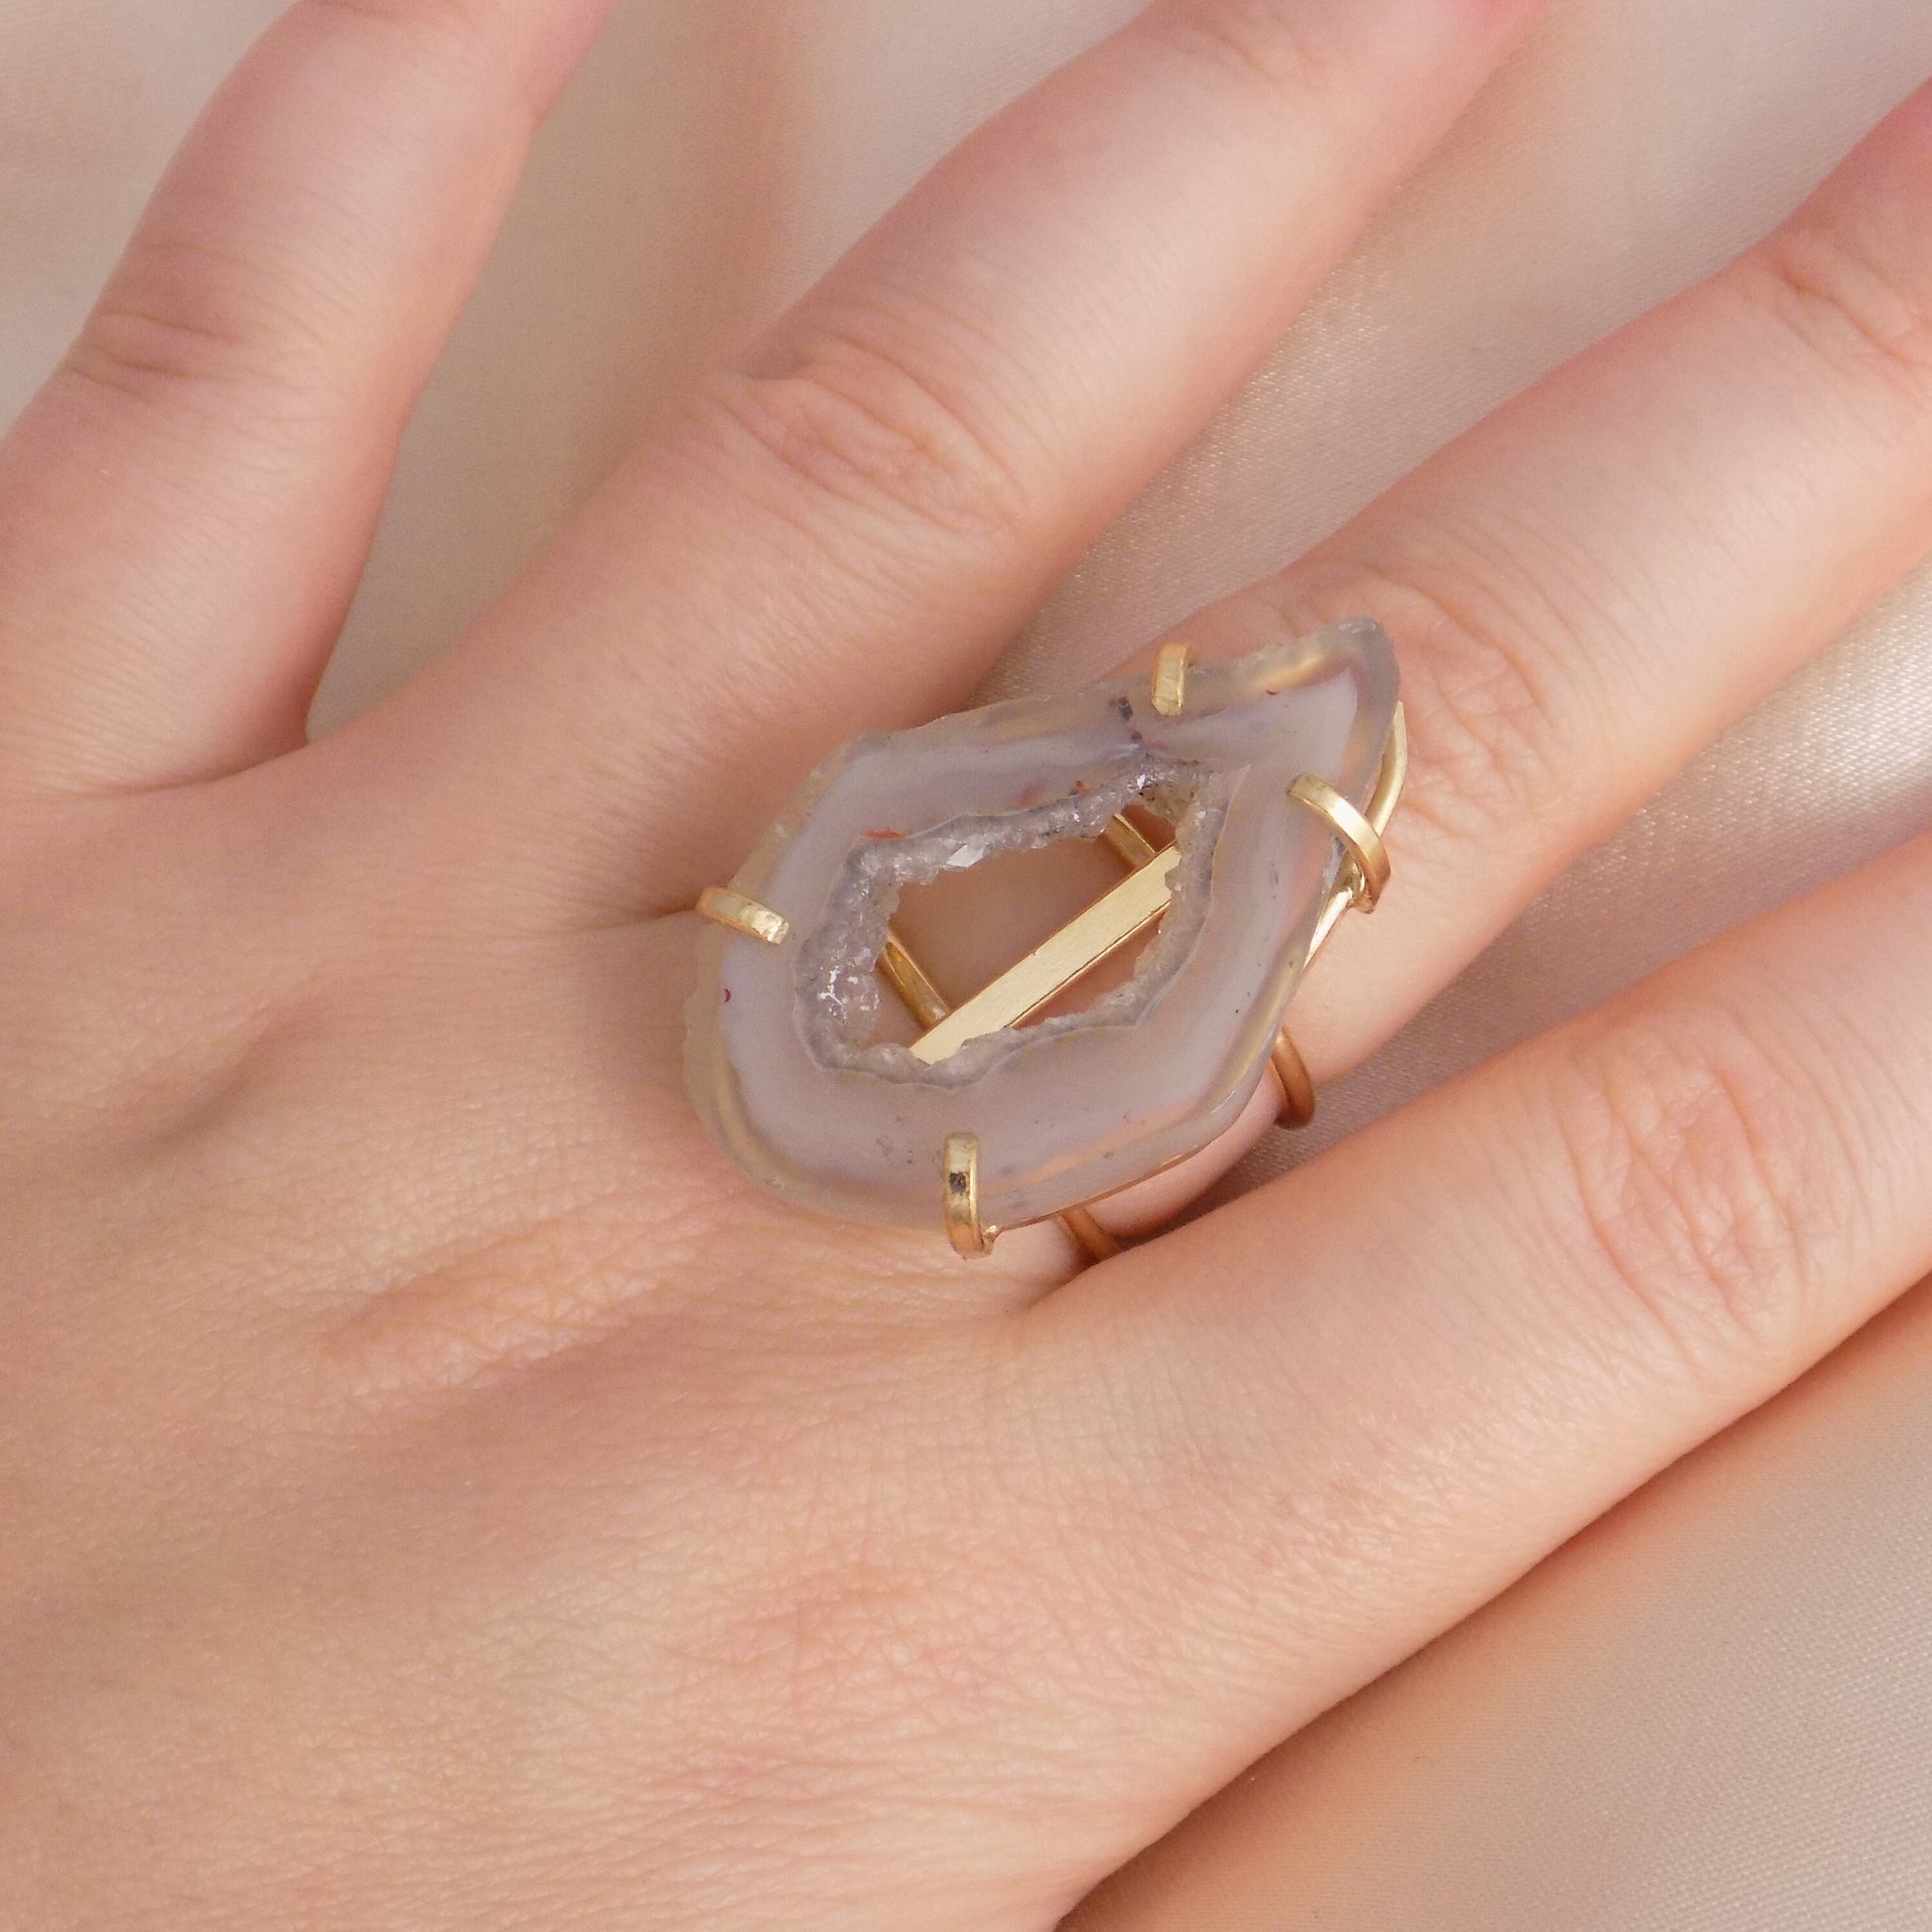 Unique Geode Ring Gold - Adjustable Crystal Rings For Women - Christmas Gift - M7-131